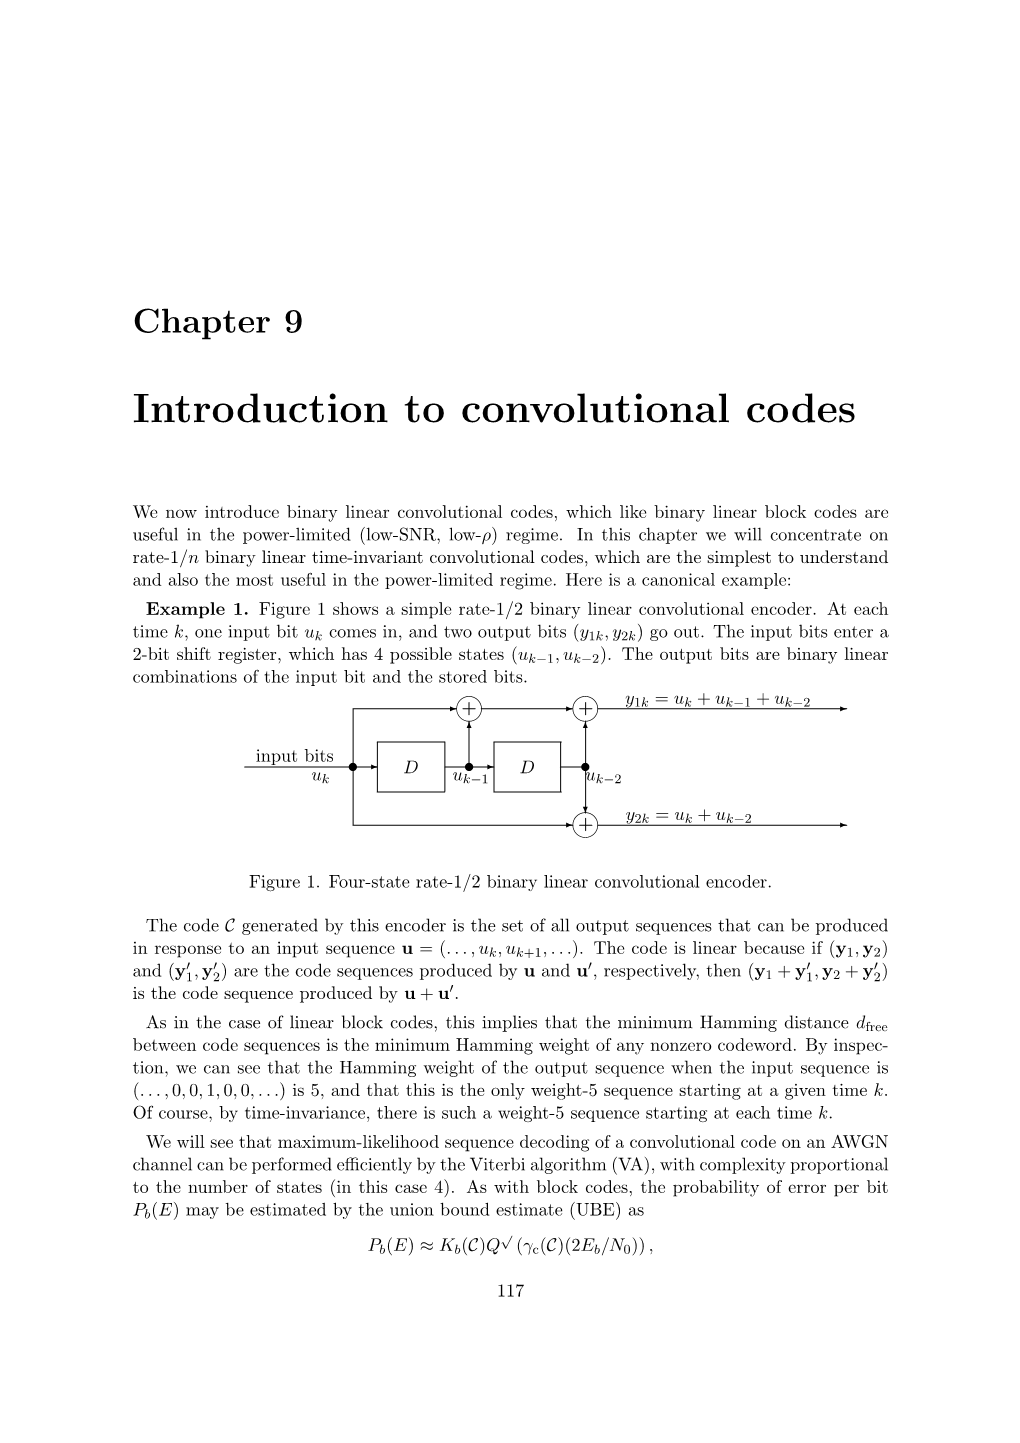 Introduction to Convolutional Codes